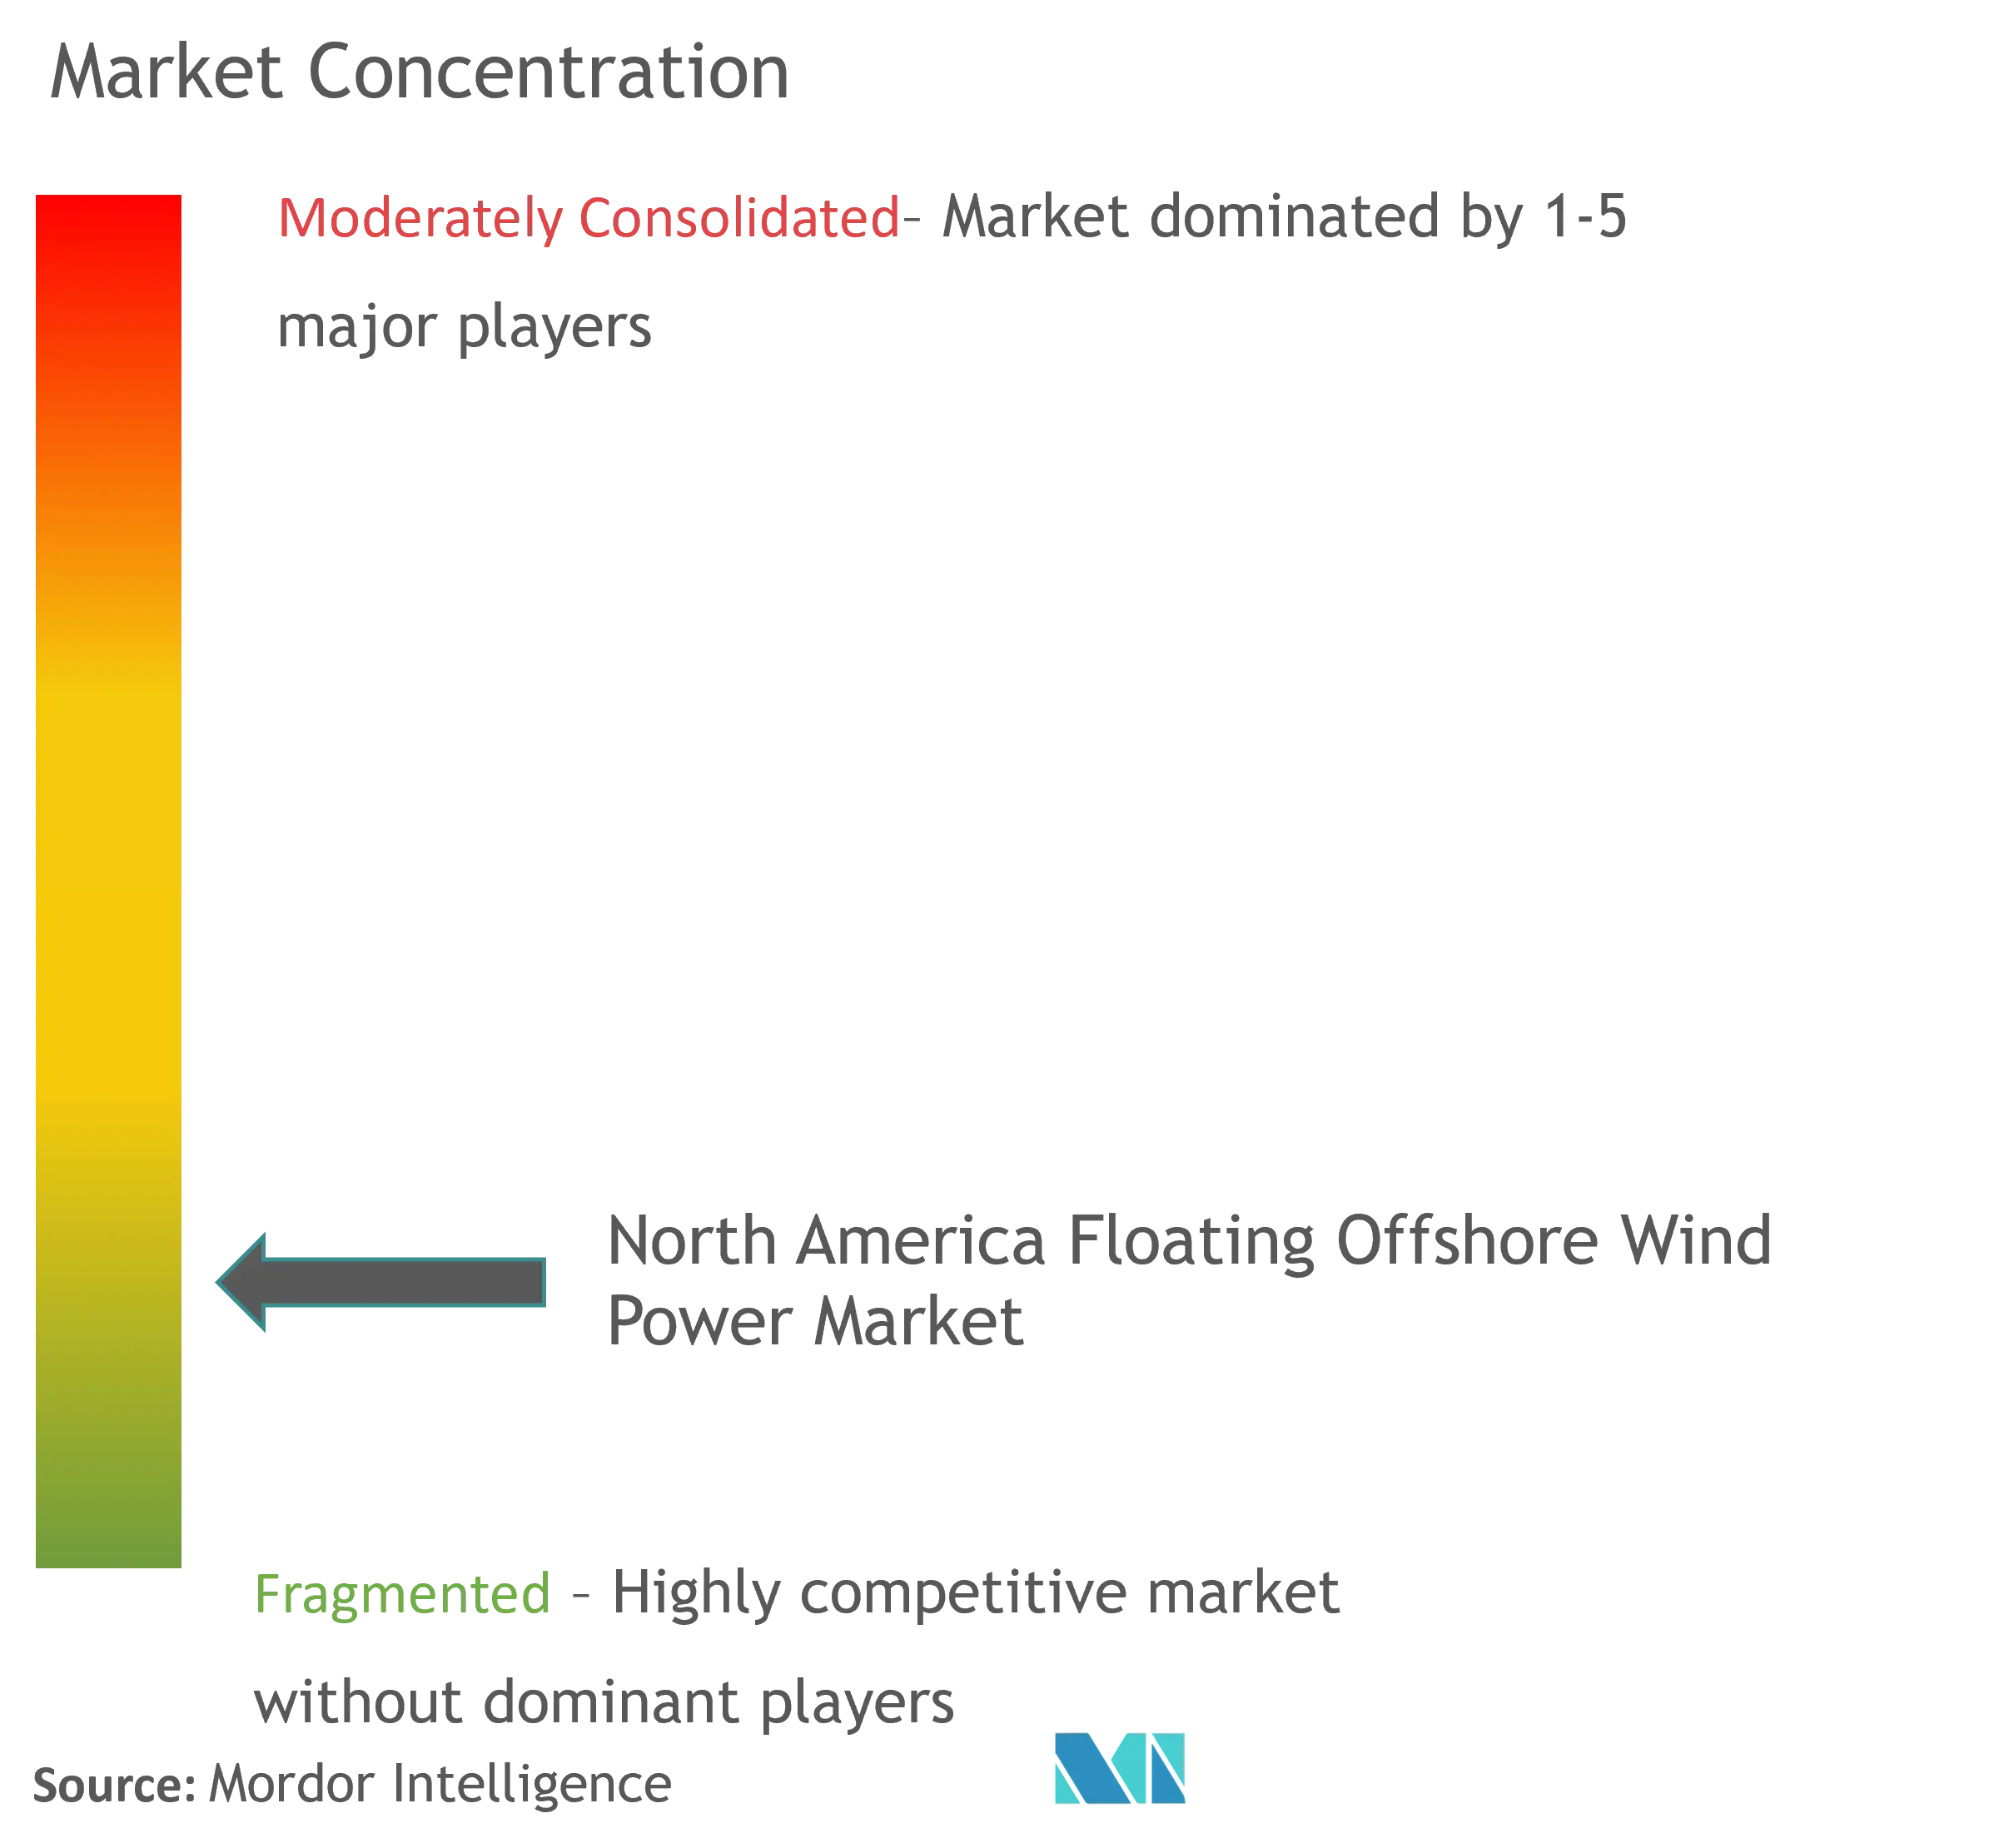 North America Floating Offshore Wind Power Market Concentration